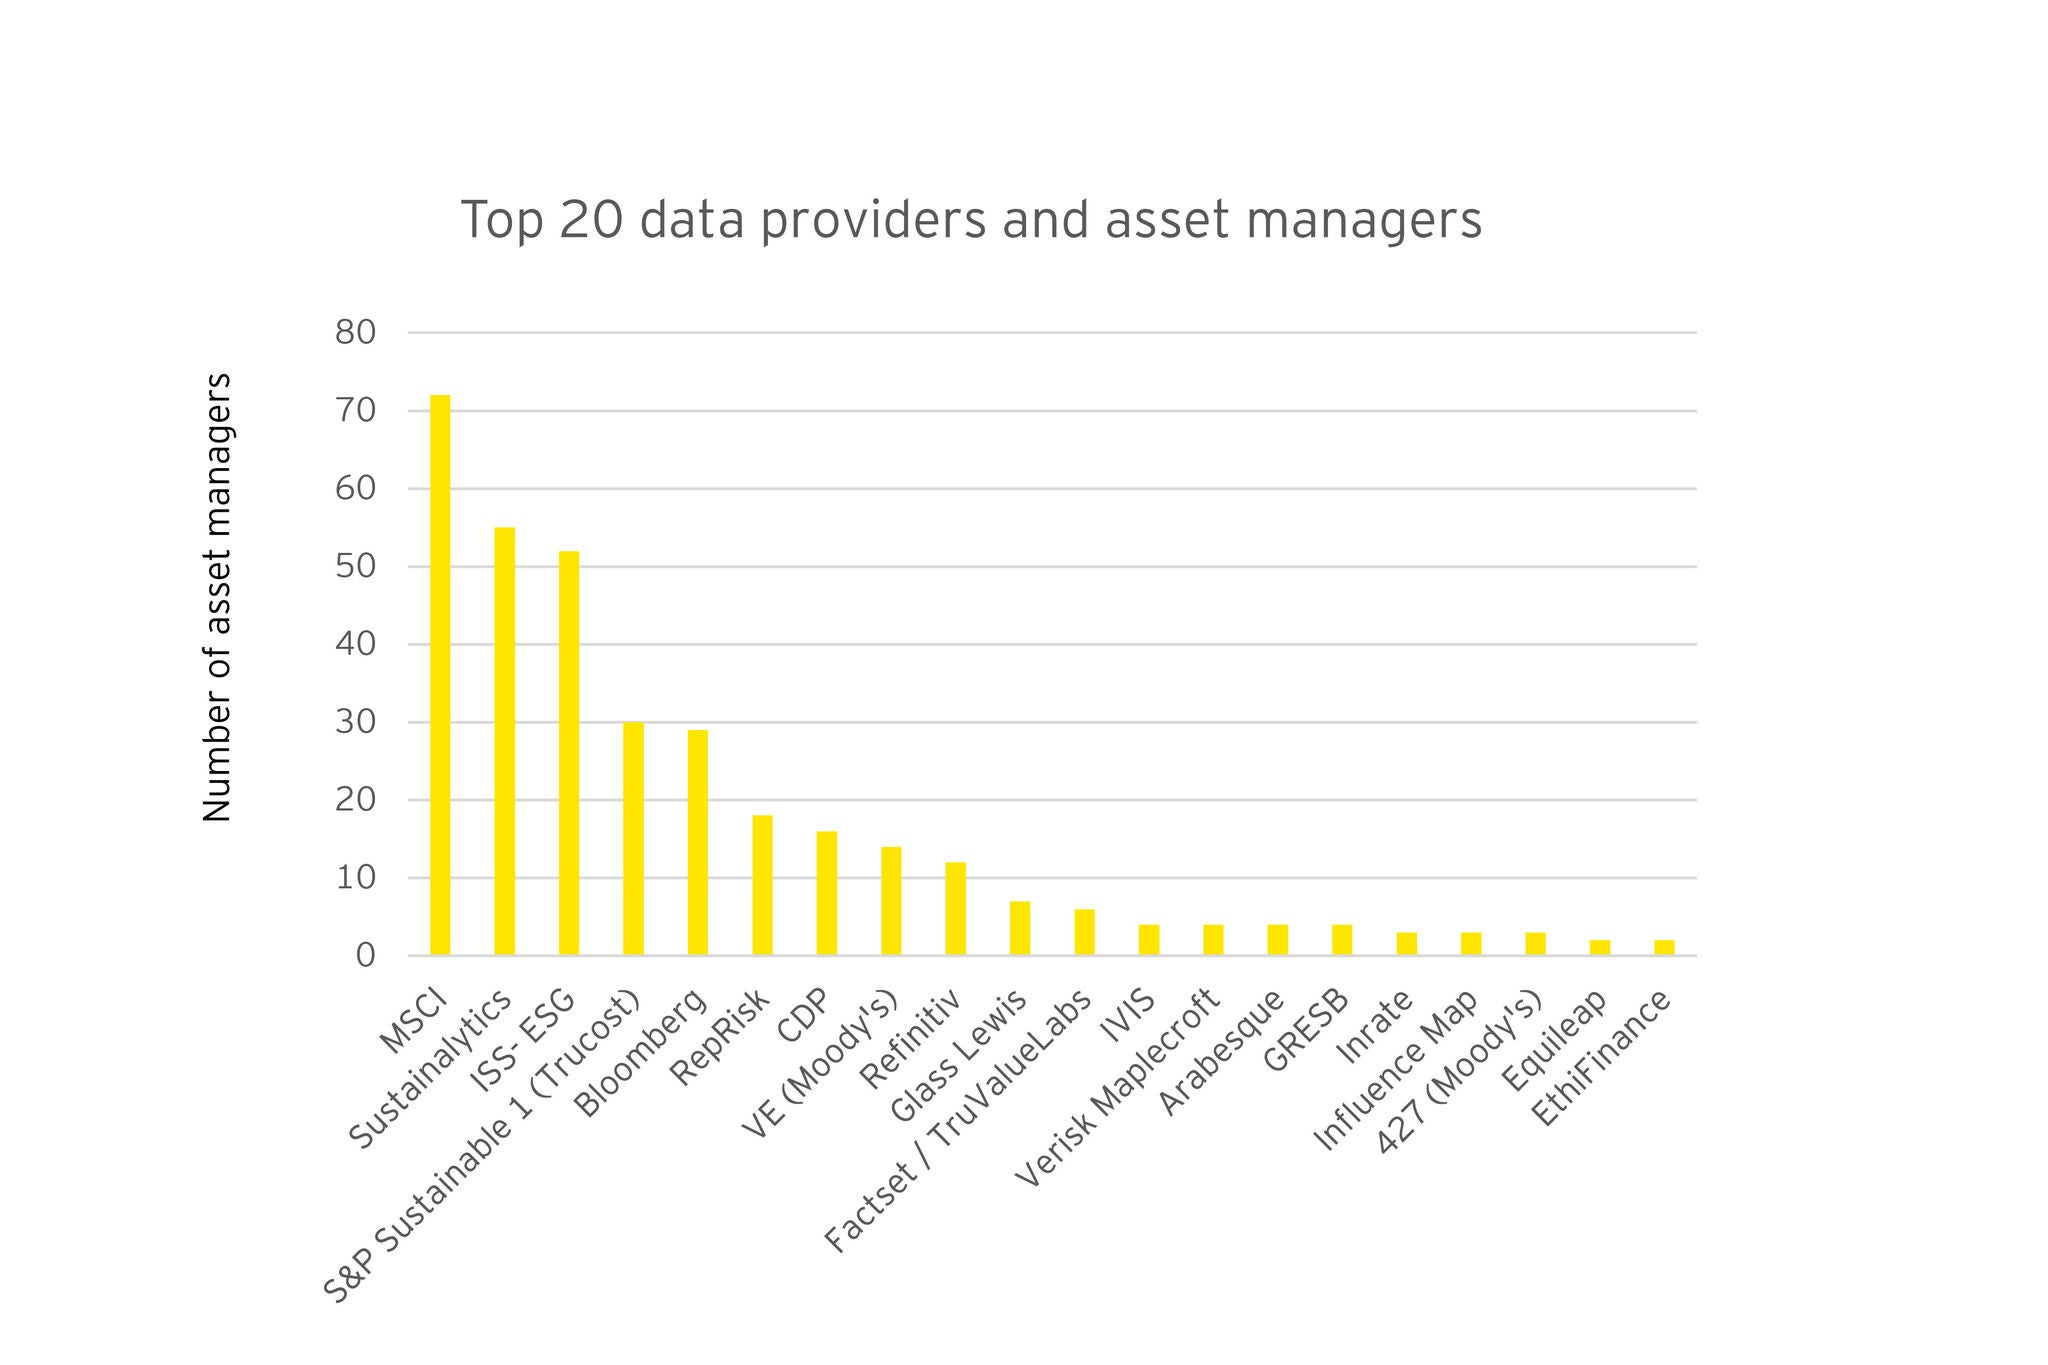 ey-top-20-data-providers-used-by-asset-managers.jpg